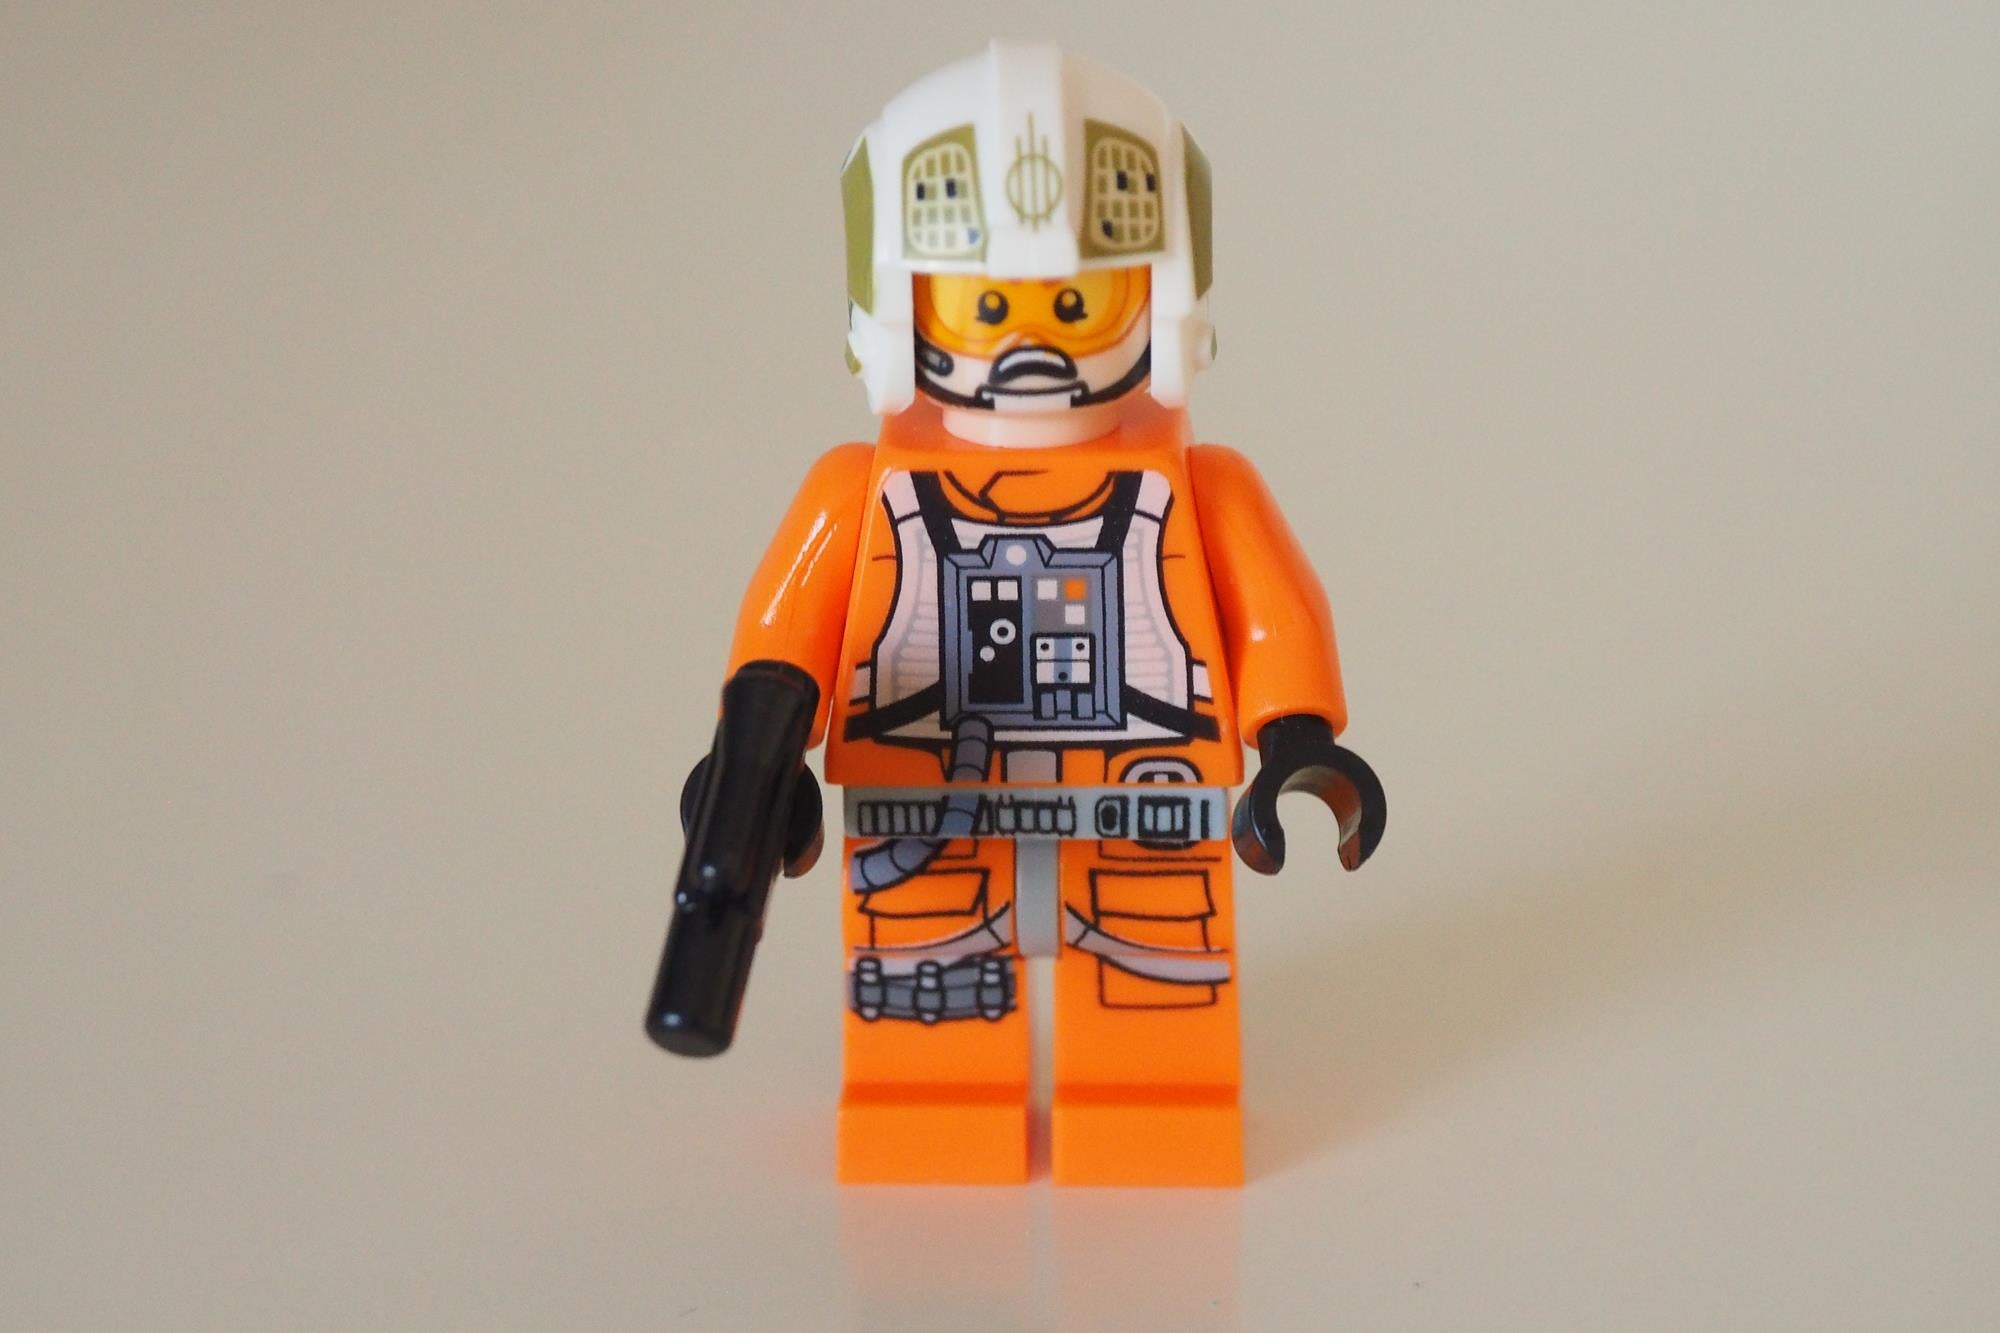 LEGO Star Wars minifigure with helmet and blaster.